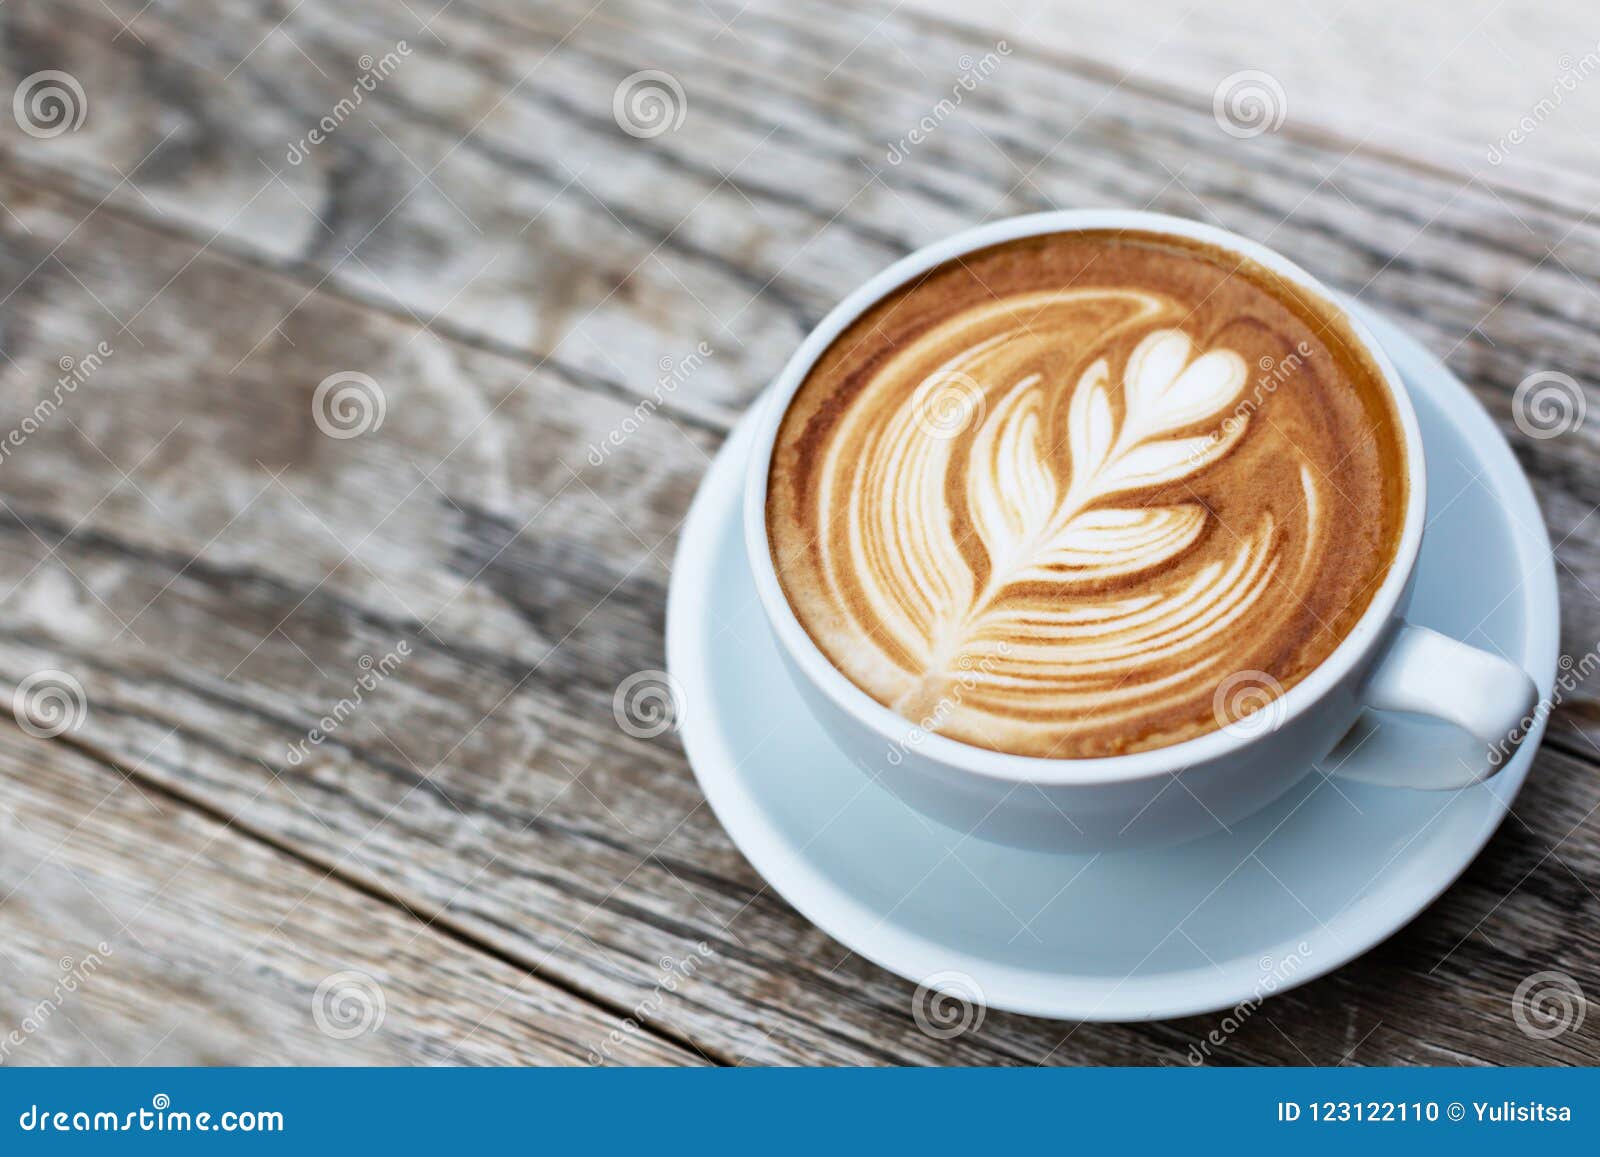 a cup of cappuccino with latte art